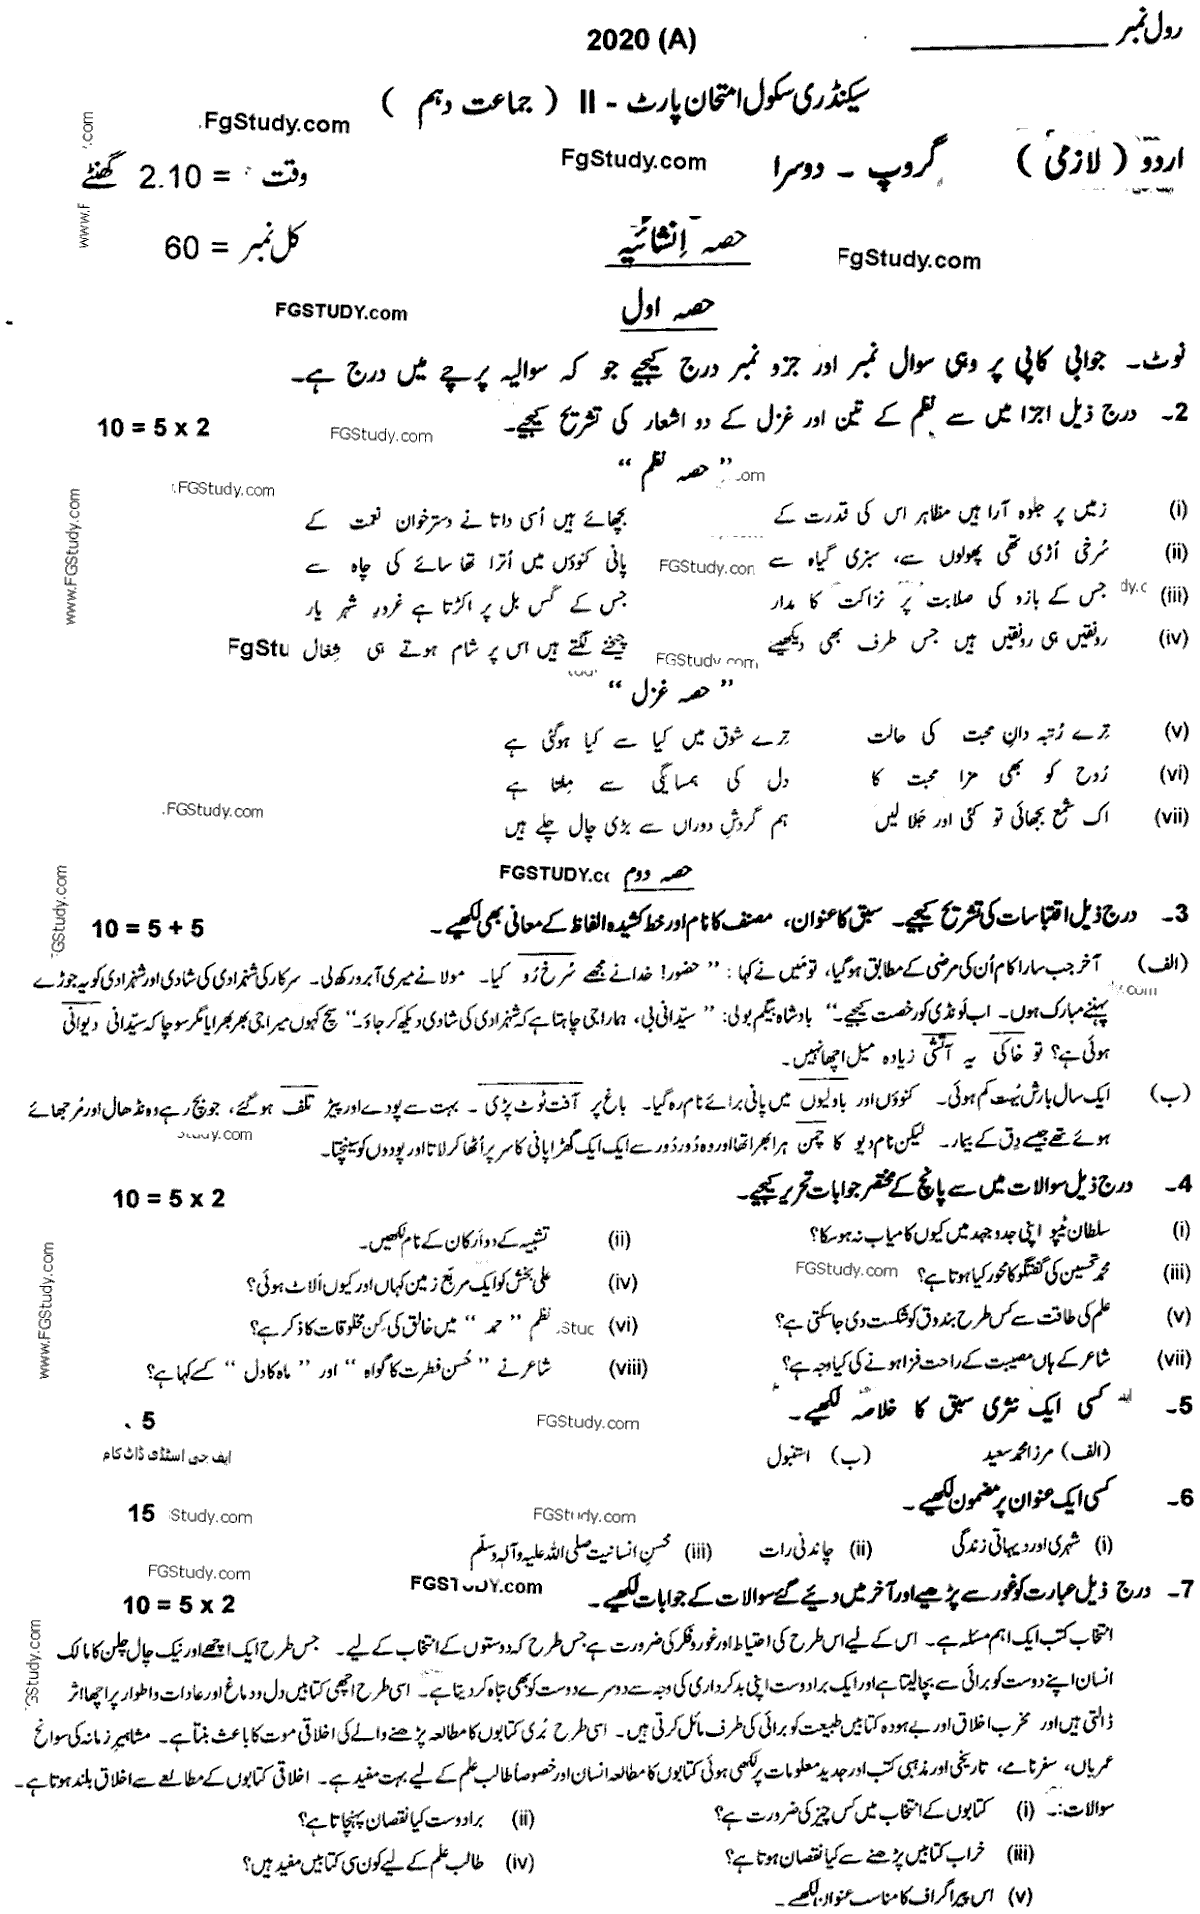 Urdu Group 2 Subjective 10th Class Past Papers 2020